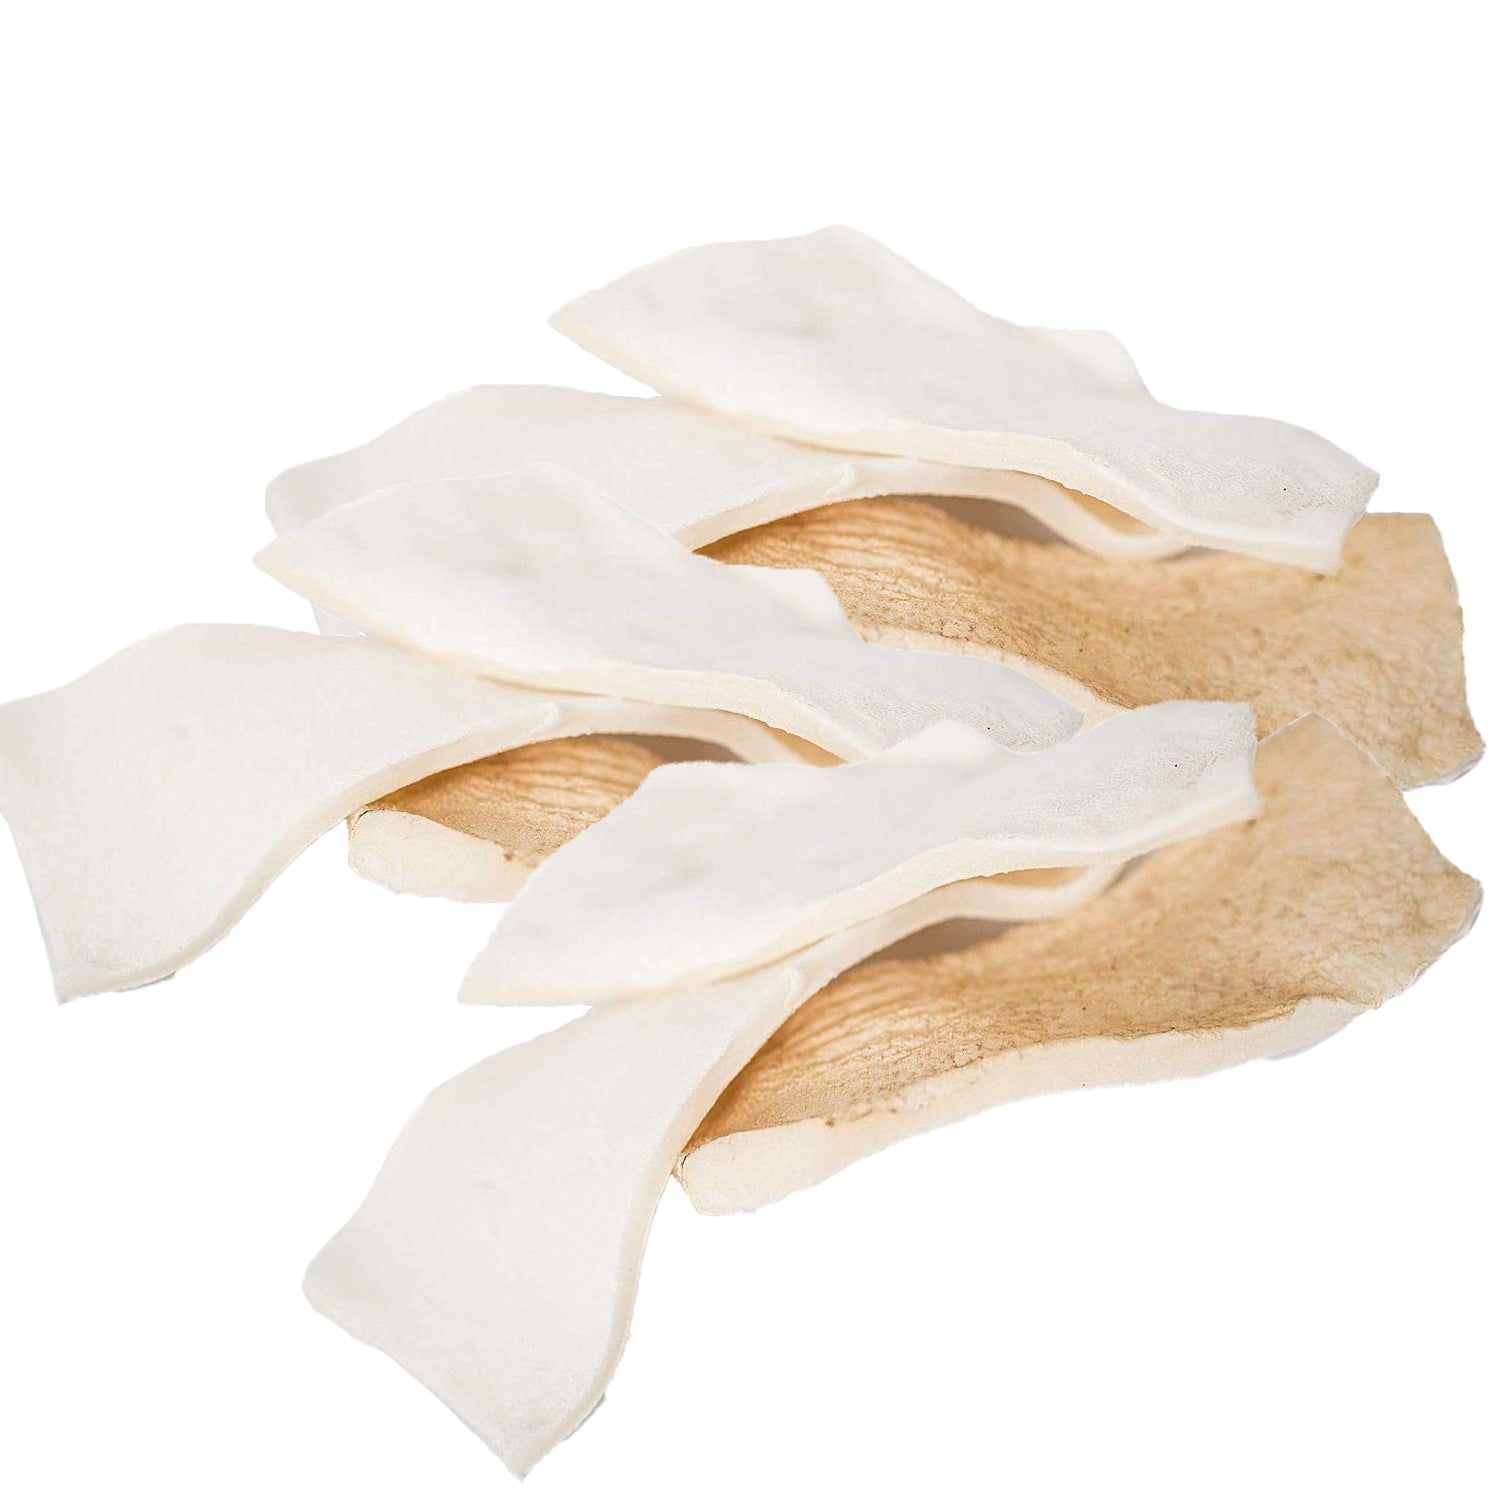 Specialty Products Premium Thick Rawhide Strips Dog Treats, 3lb